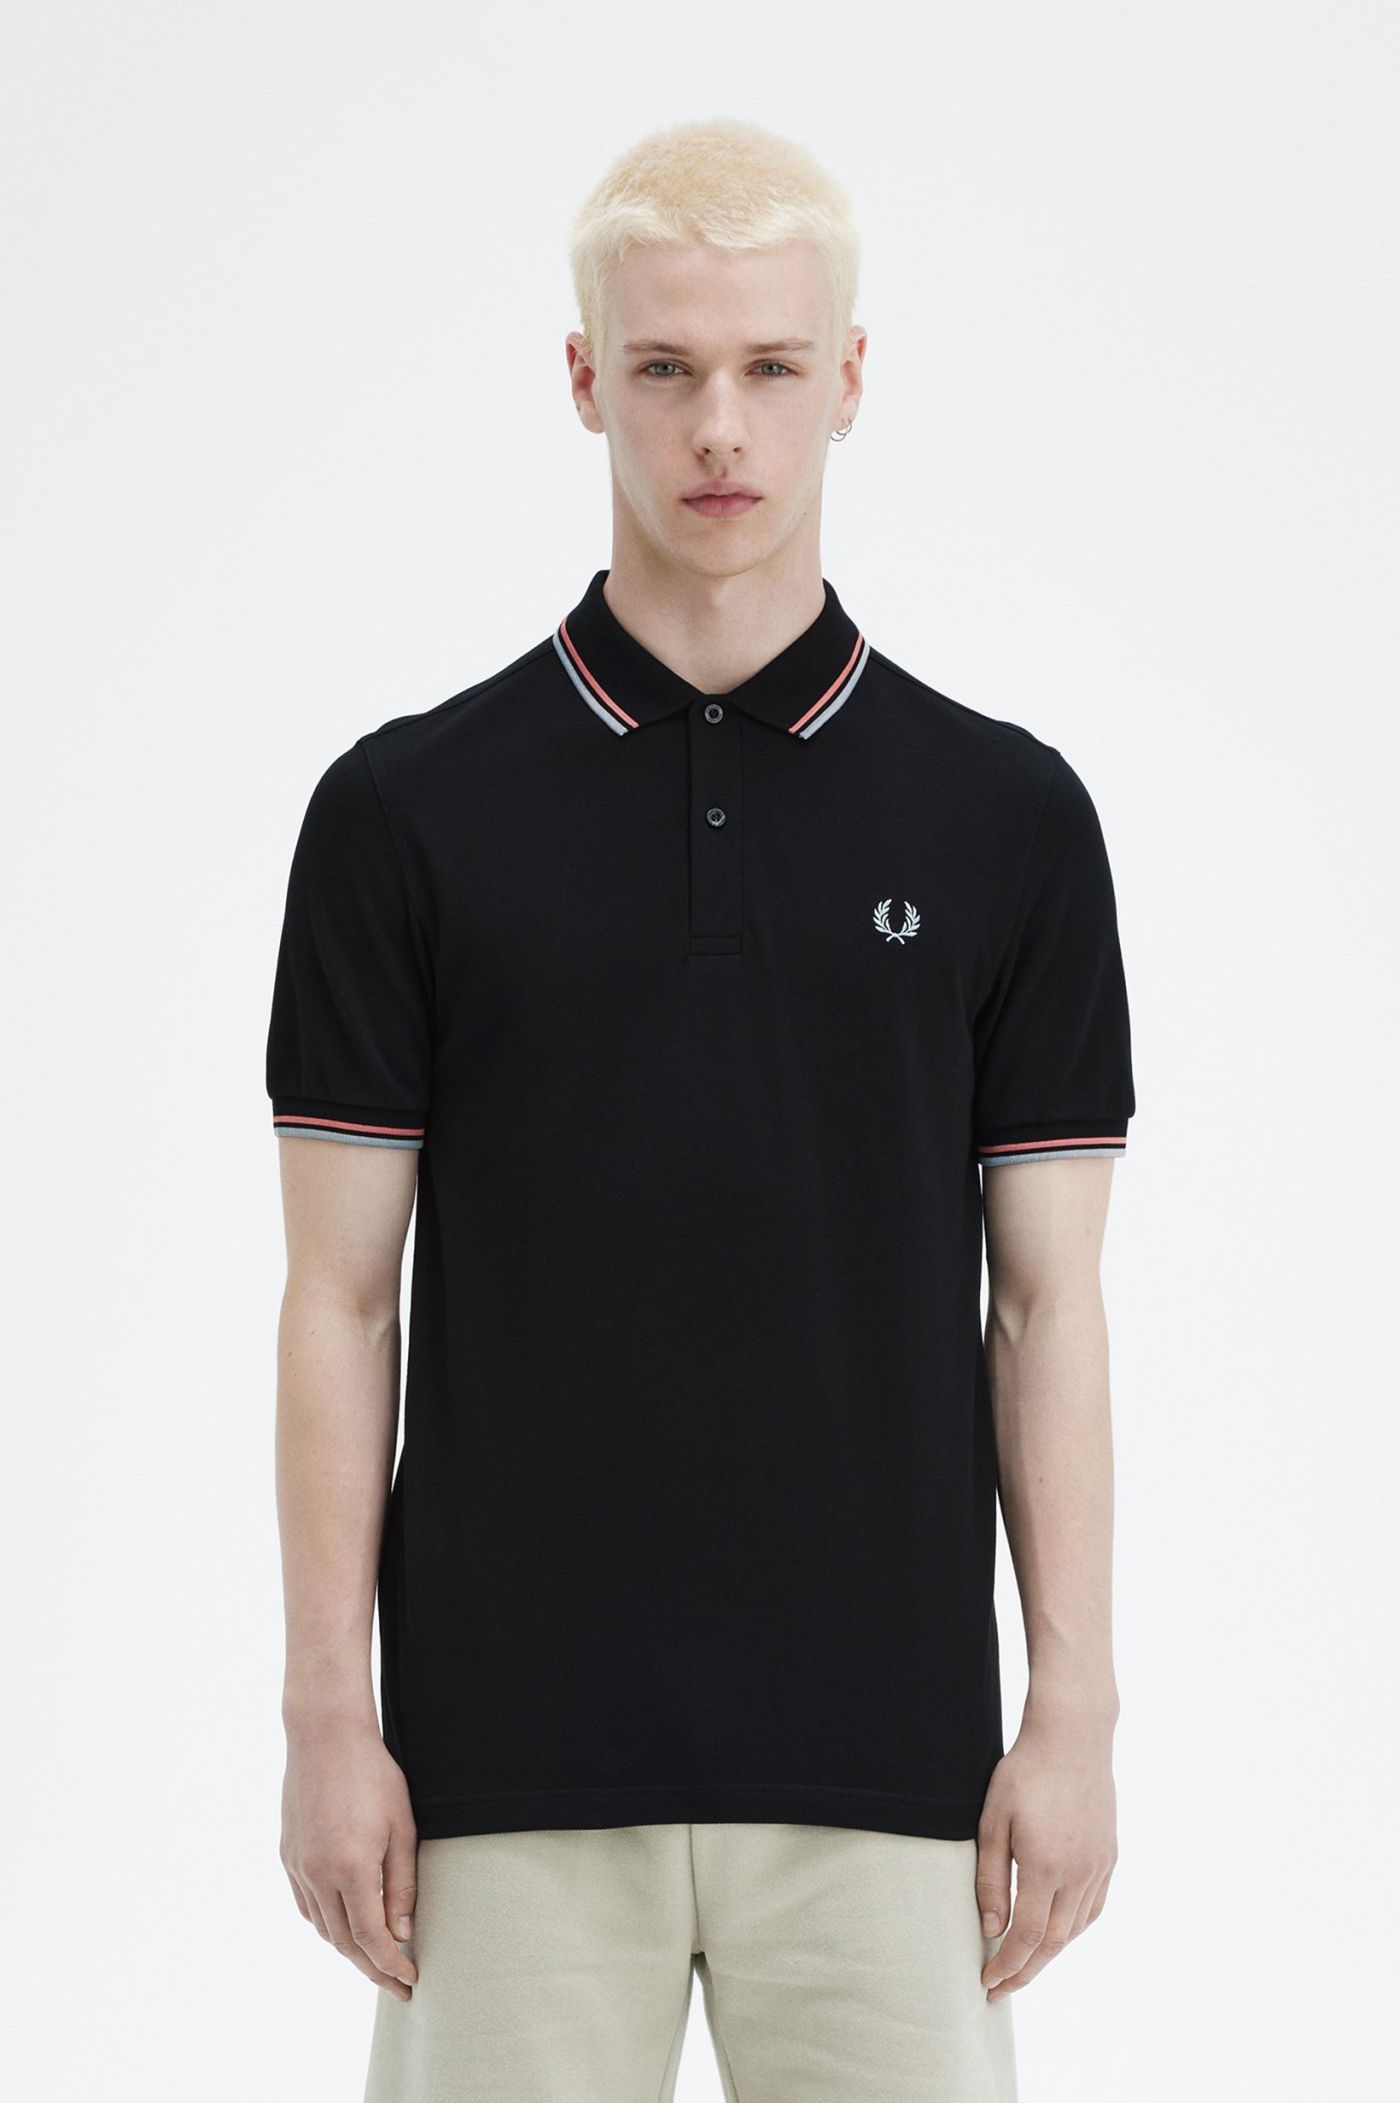 The Fred Perry Shirt - M3600スポーツ